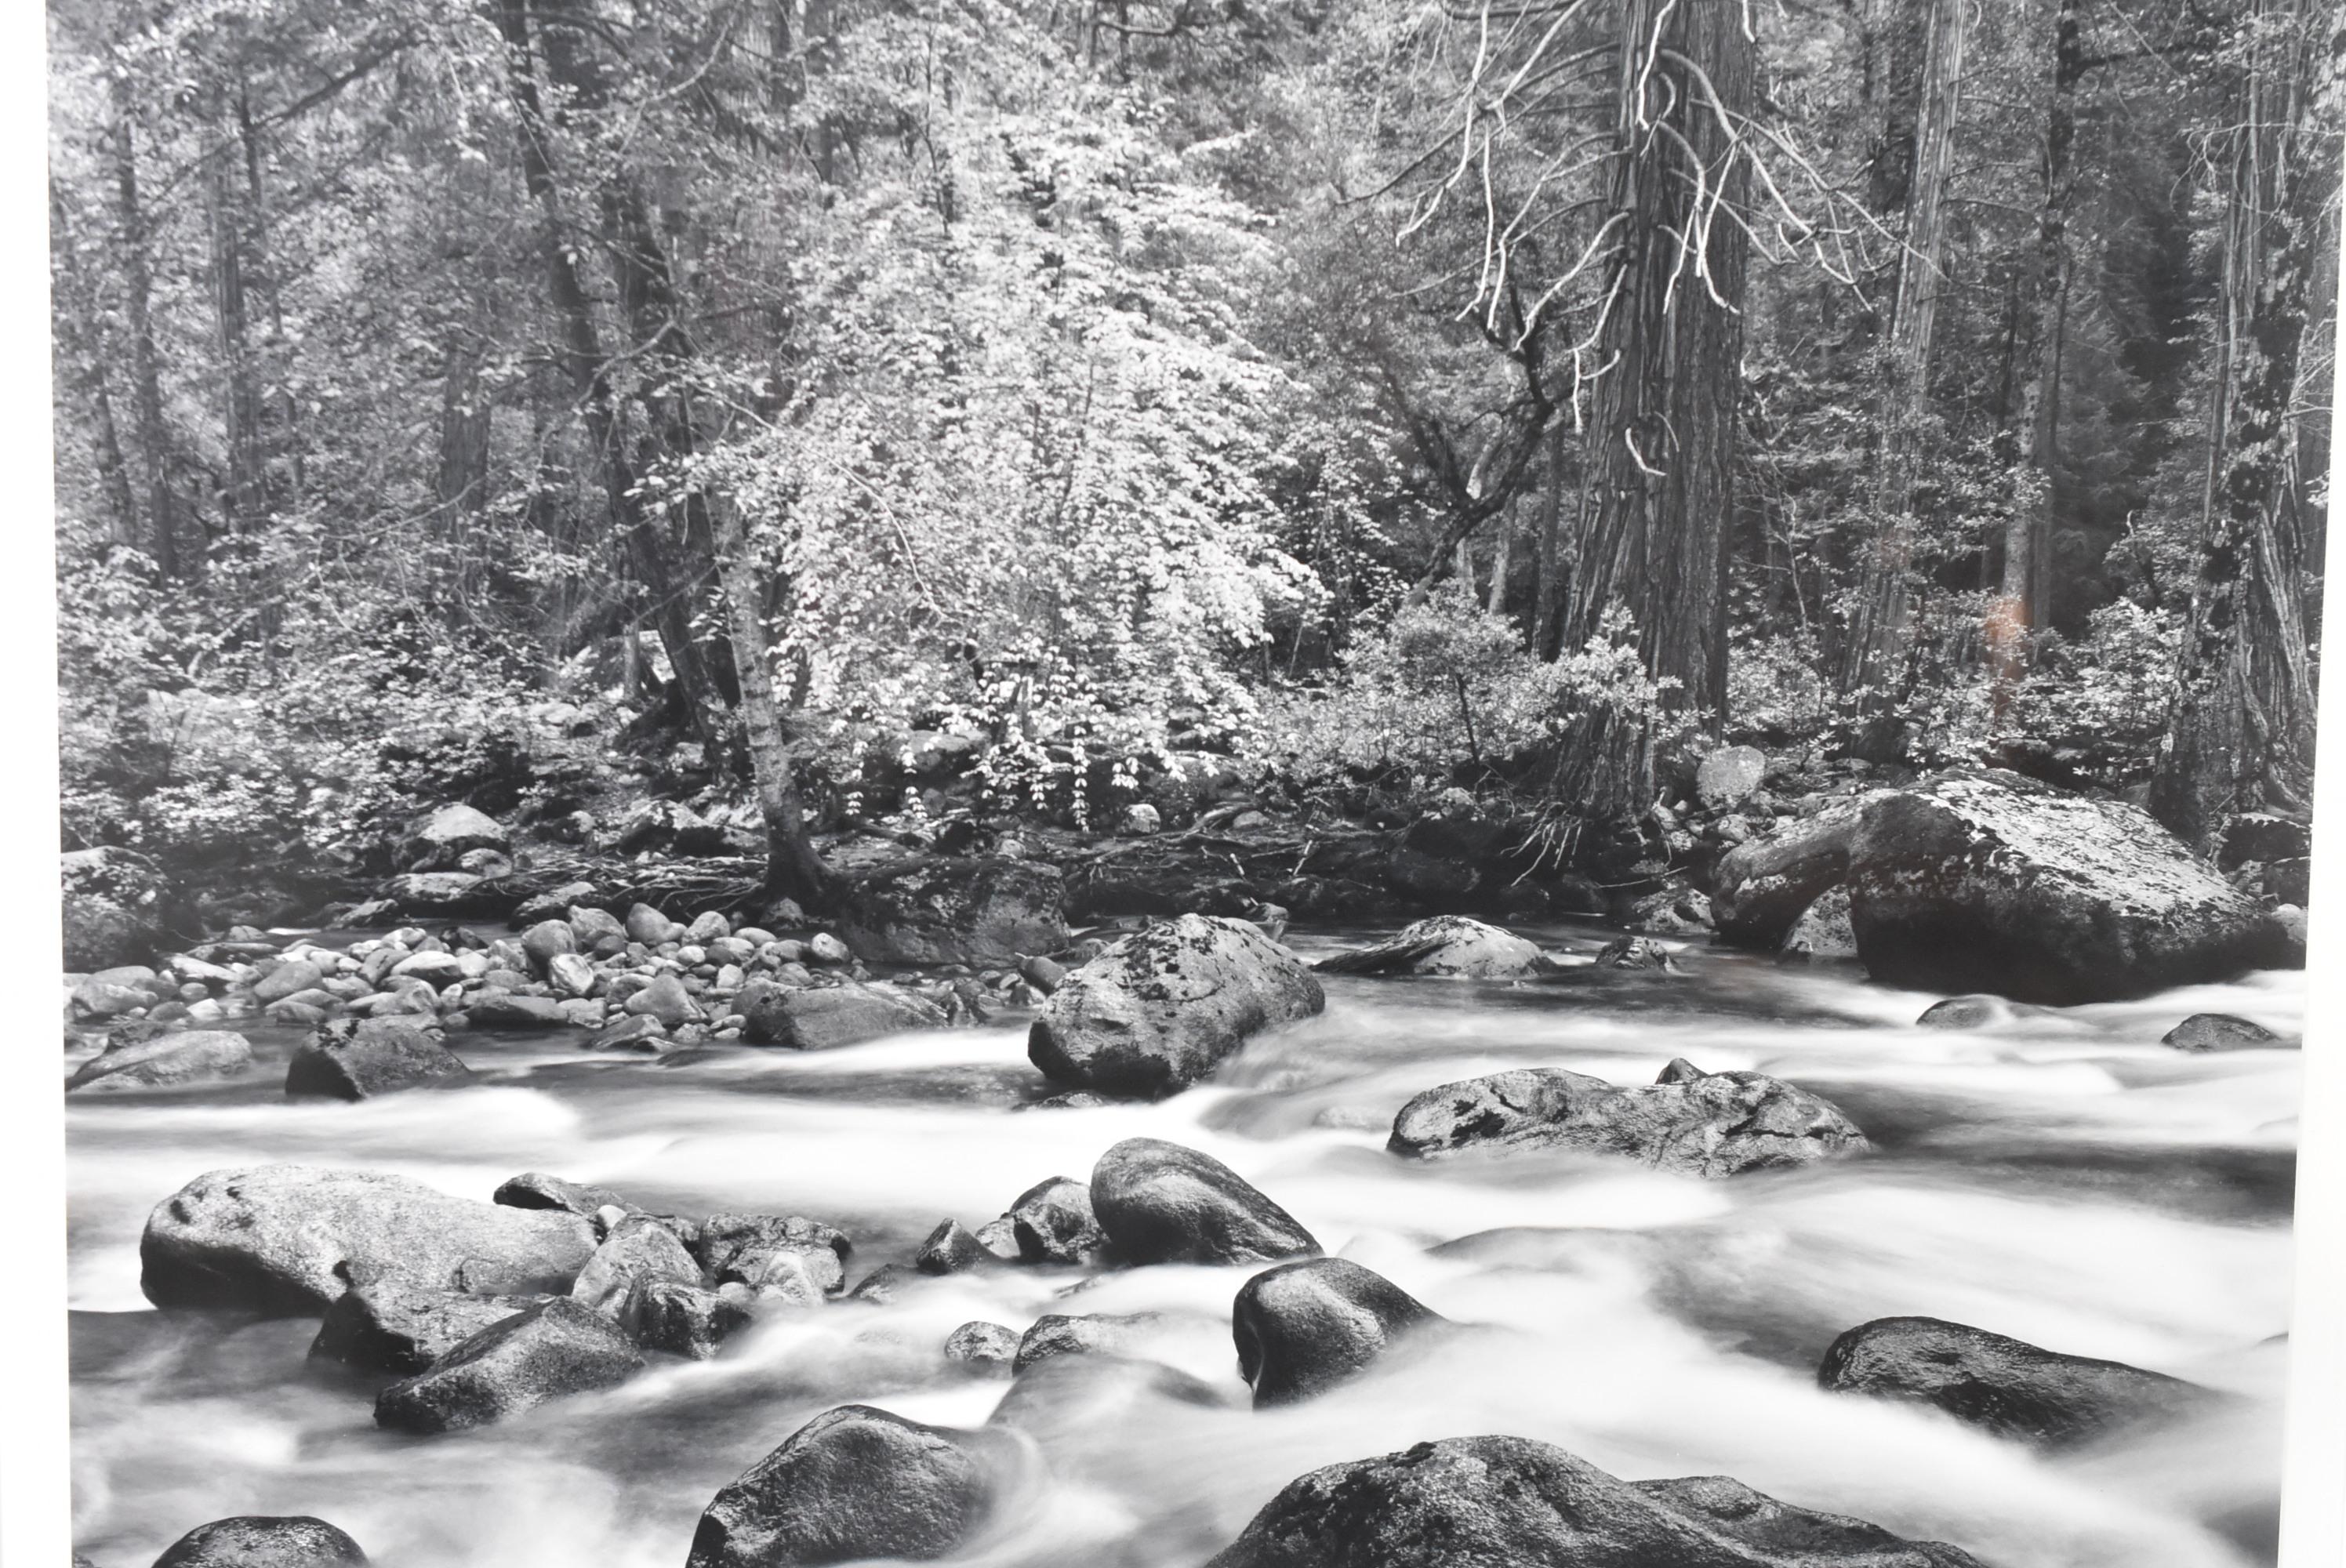 Original black and white silver gelatin print by John Sexton, signed and dated 1983. Labeled Merced River and Forest, Yosemite Valley, CA, negative made 1983, print made 1986. Overall size 17